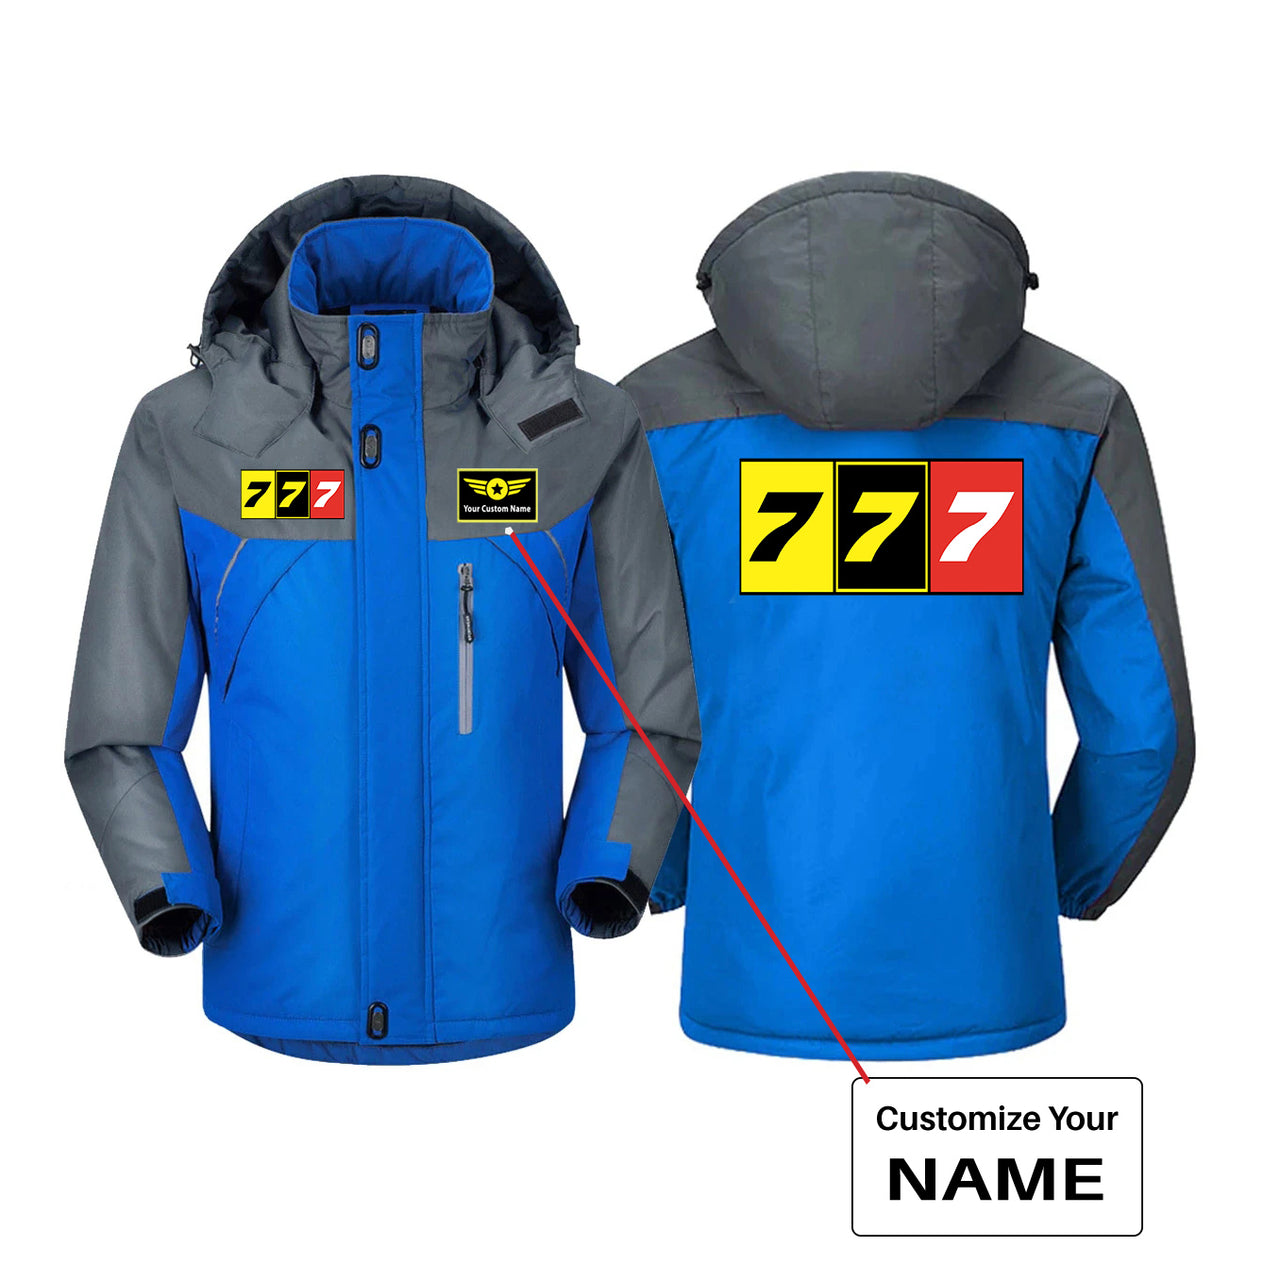 Flat Colourful 777 Designed Thick Winter Jackets